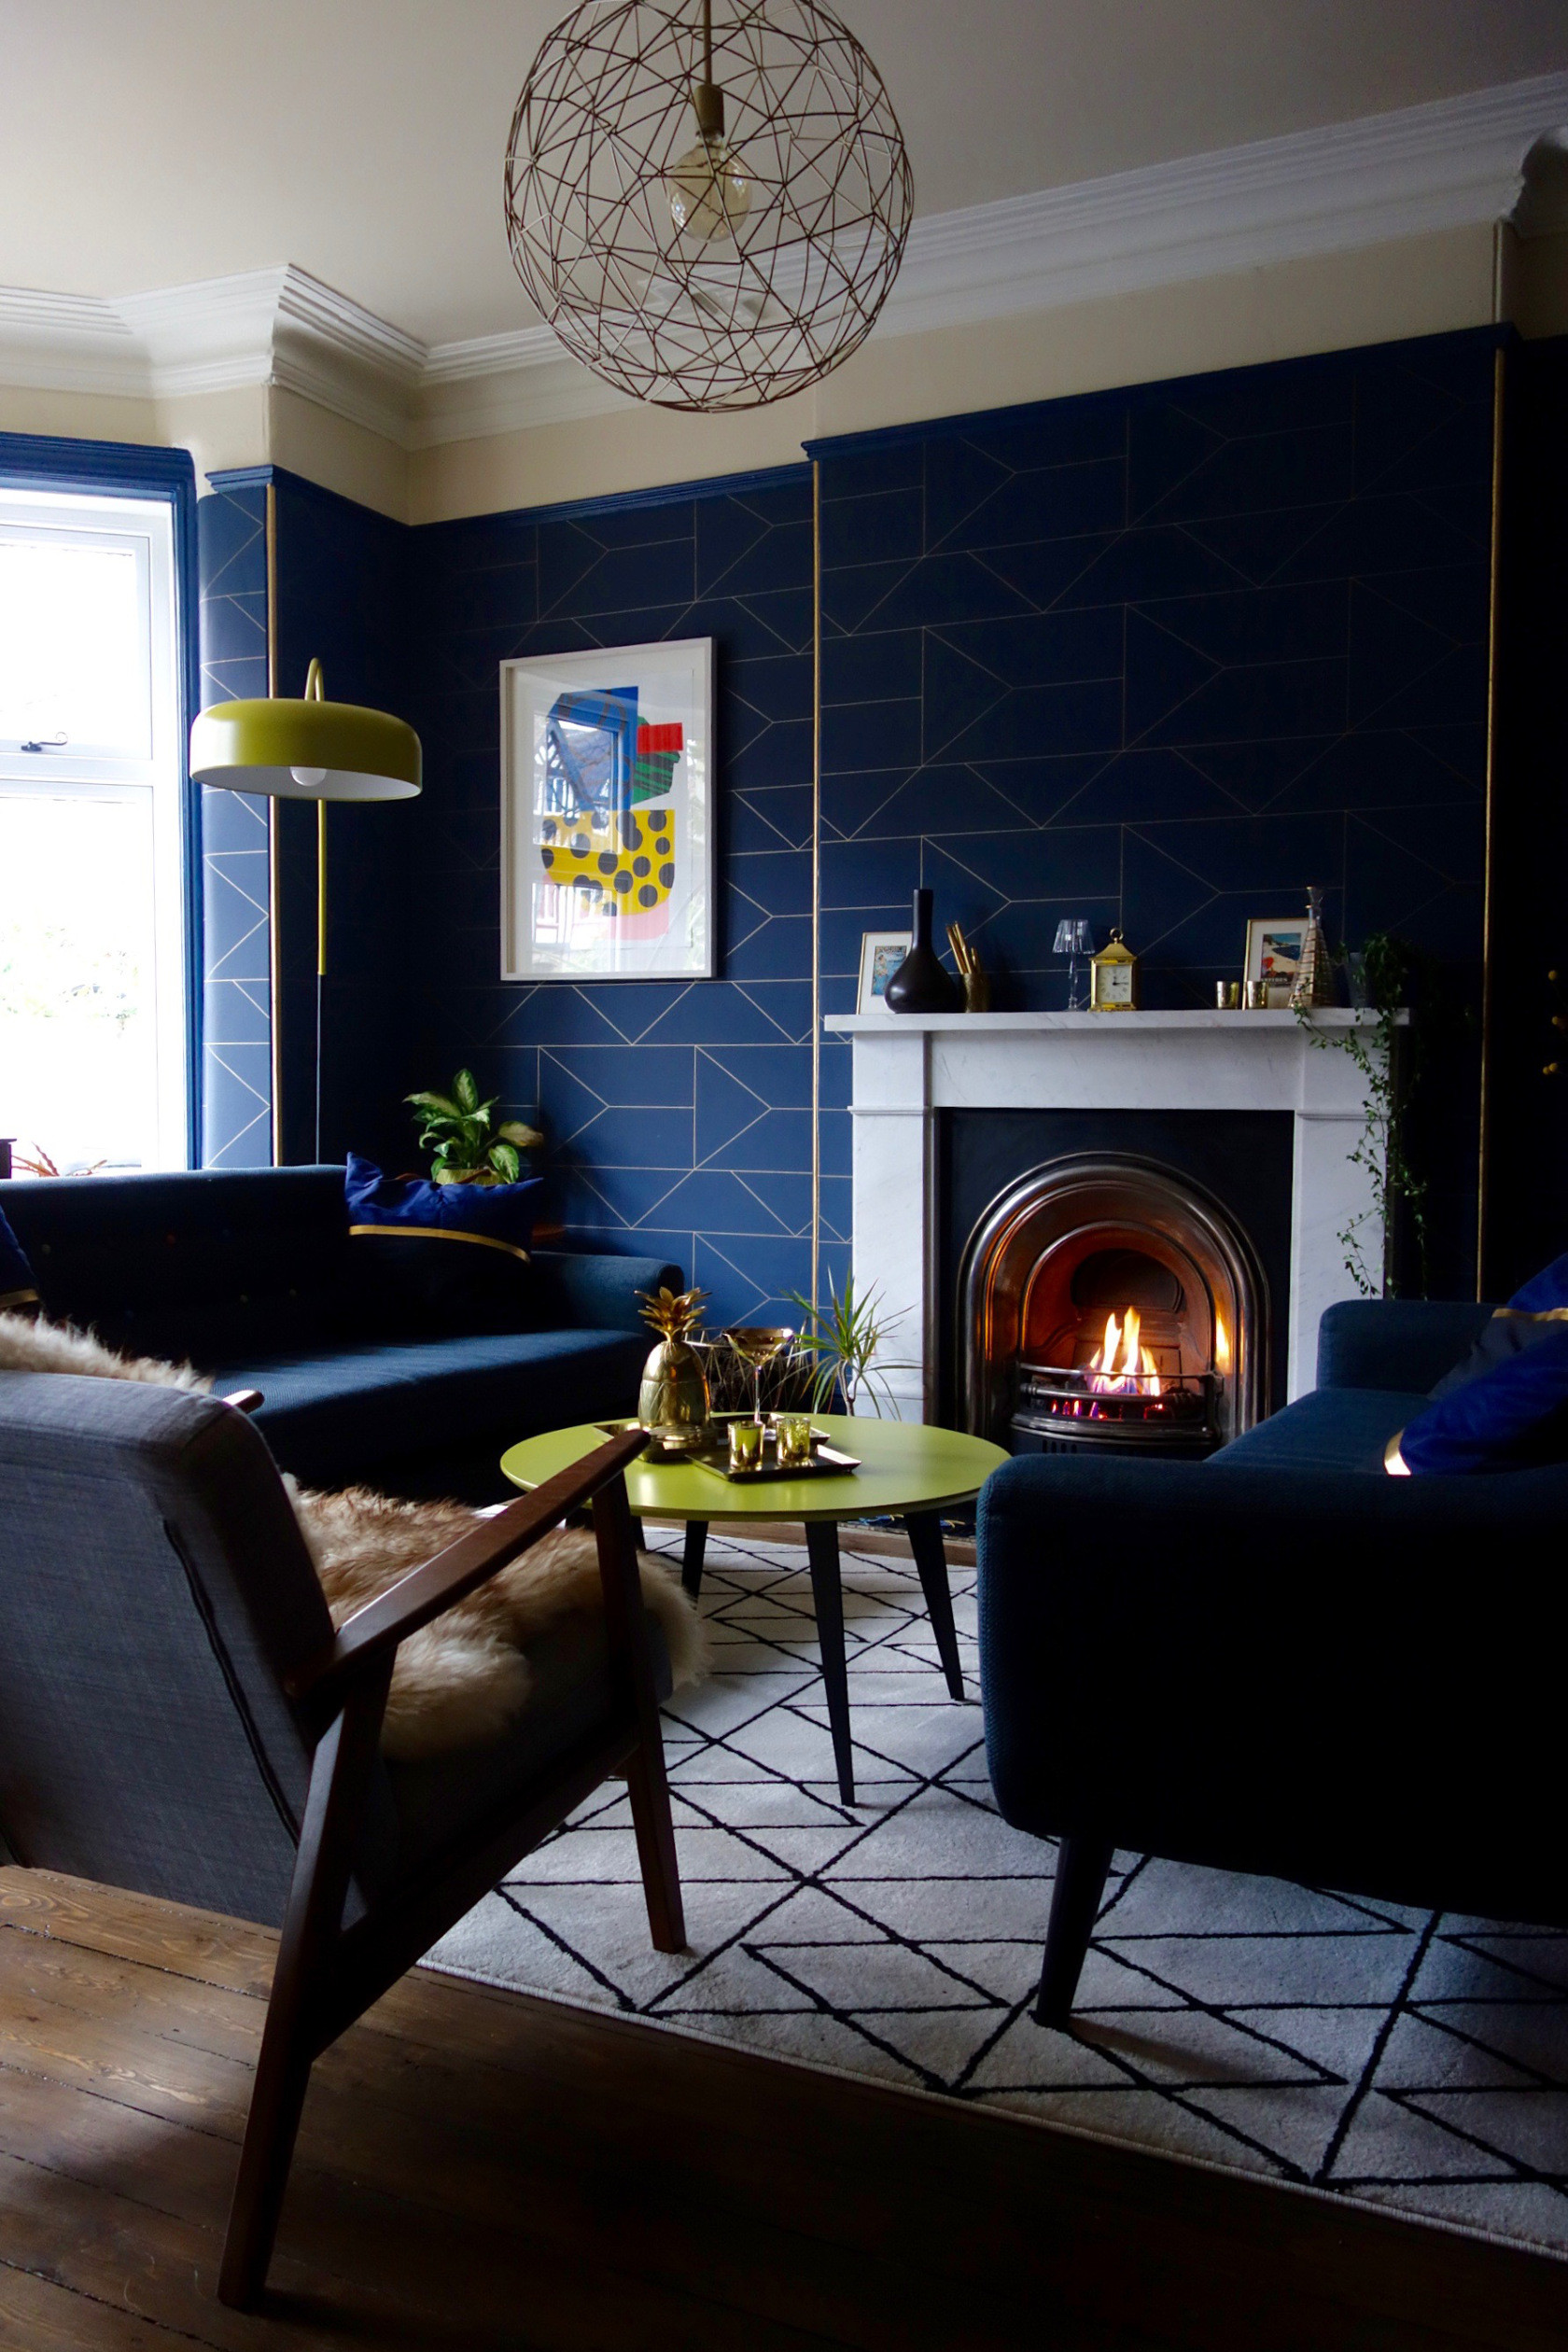 1680x2520 navy blue and gold wallpaper set off this pendant light perfectly image by  Karen Knox